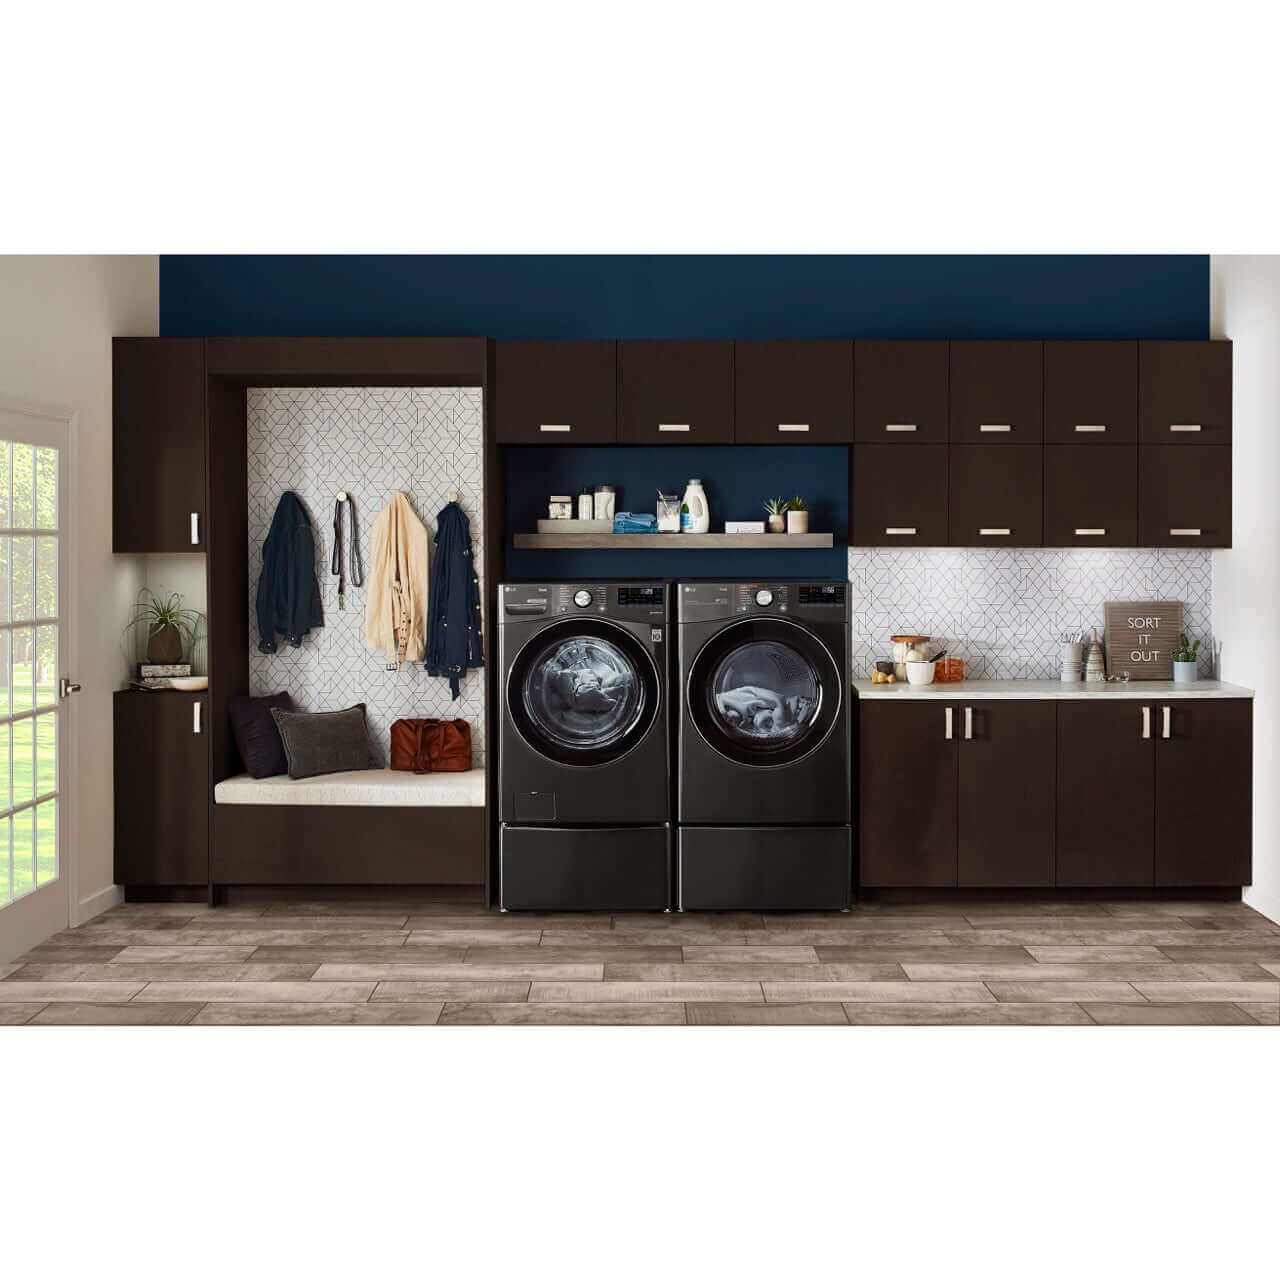 LG 27 In. 5.0-Cu. Ft. Front Load Washer with Built-In Intelligence in Black Steel (WM4200HBA)